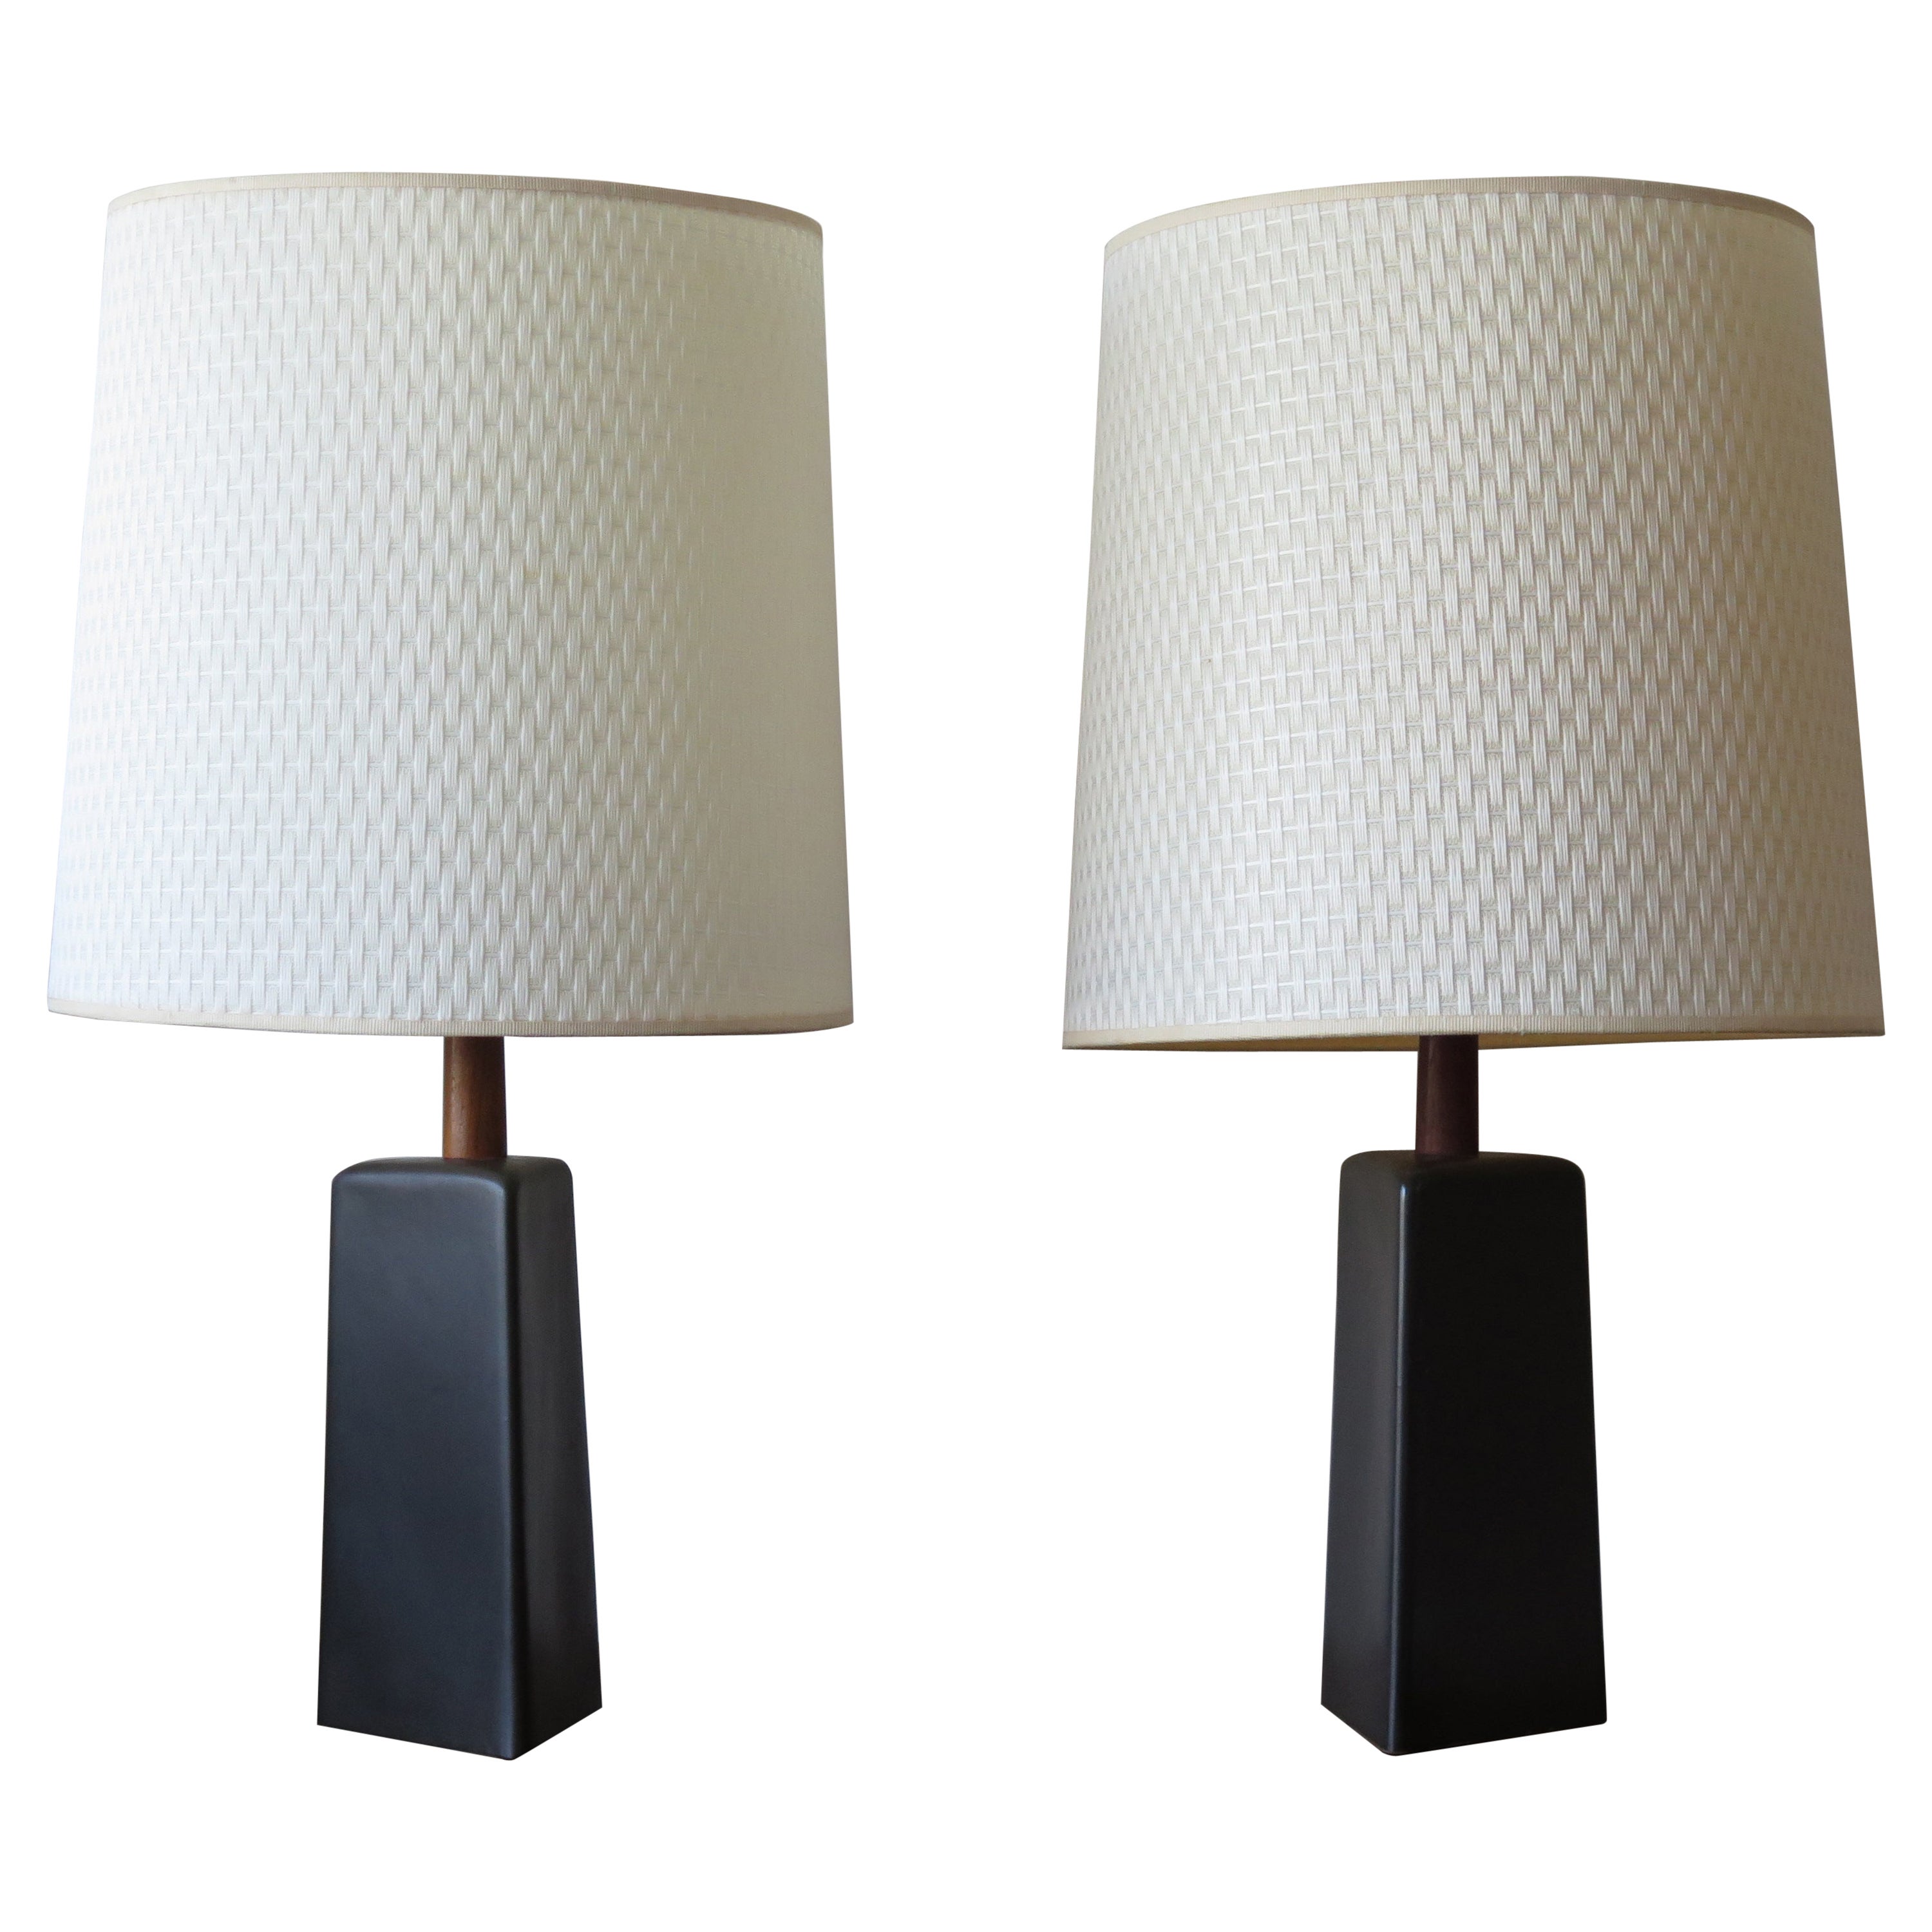 Pair of Triangular Black Lamps by Martz For Sale